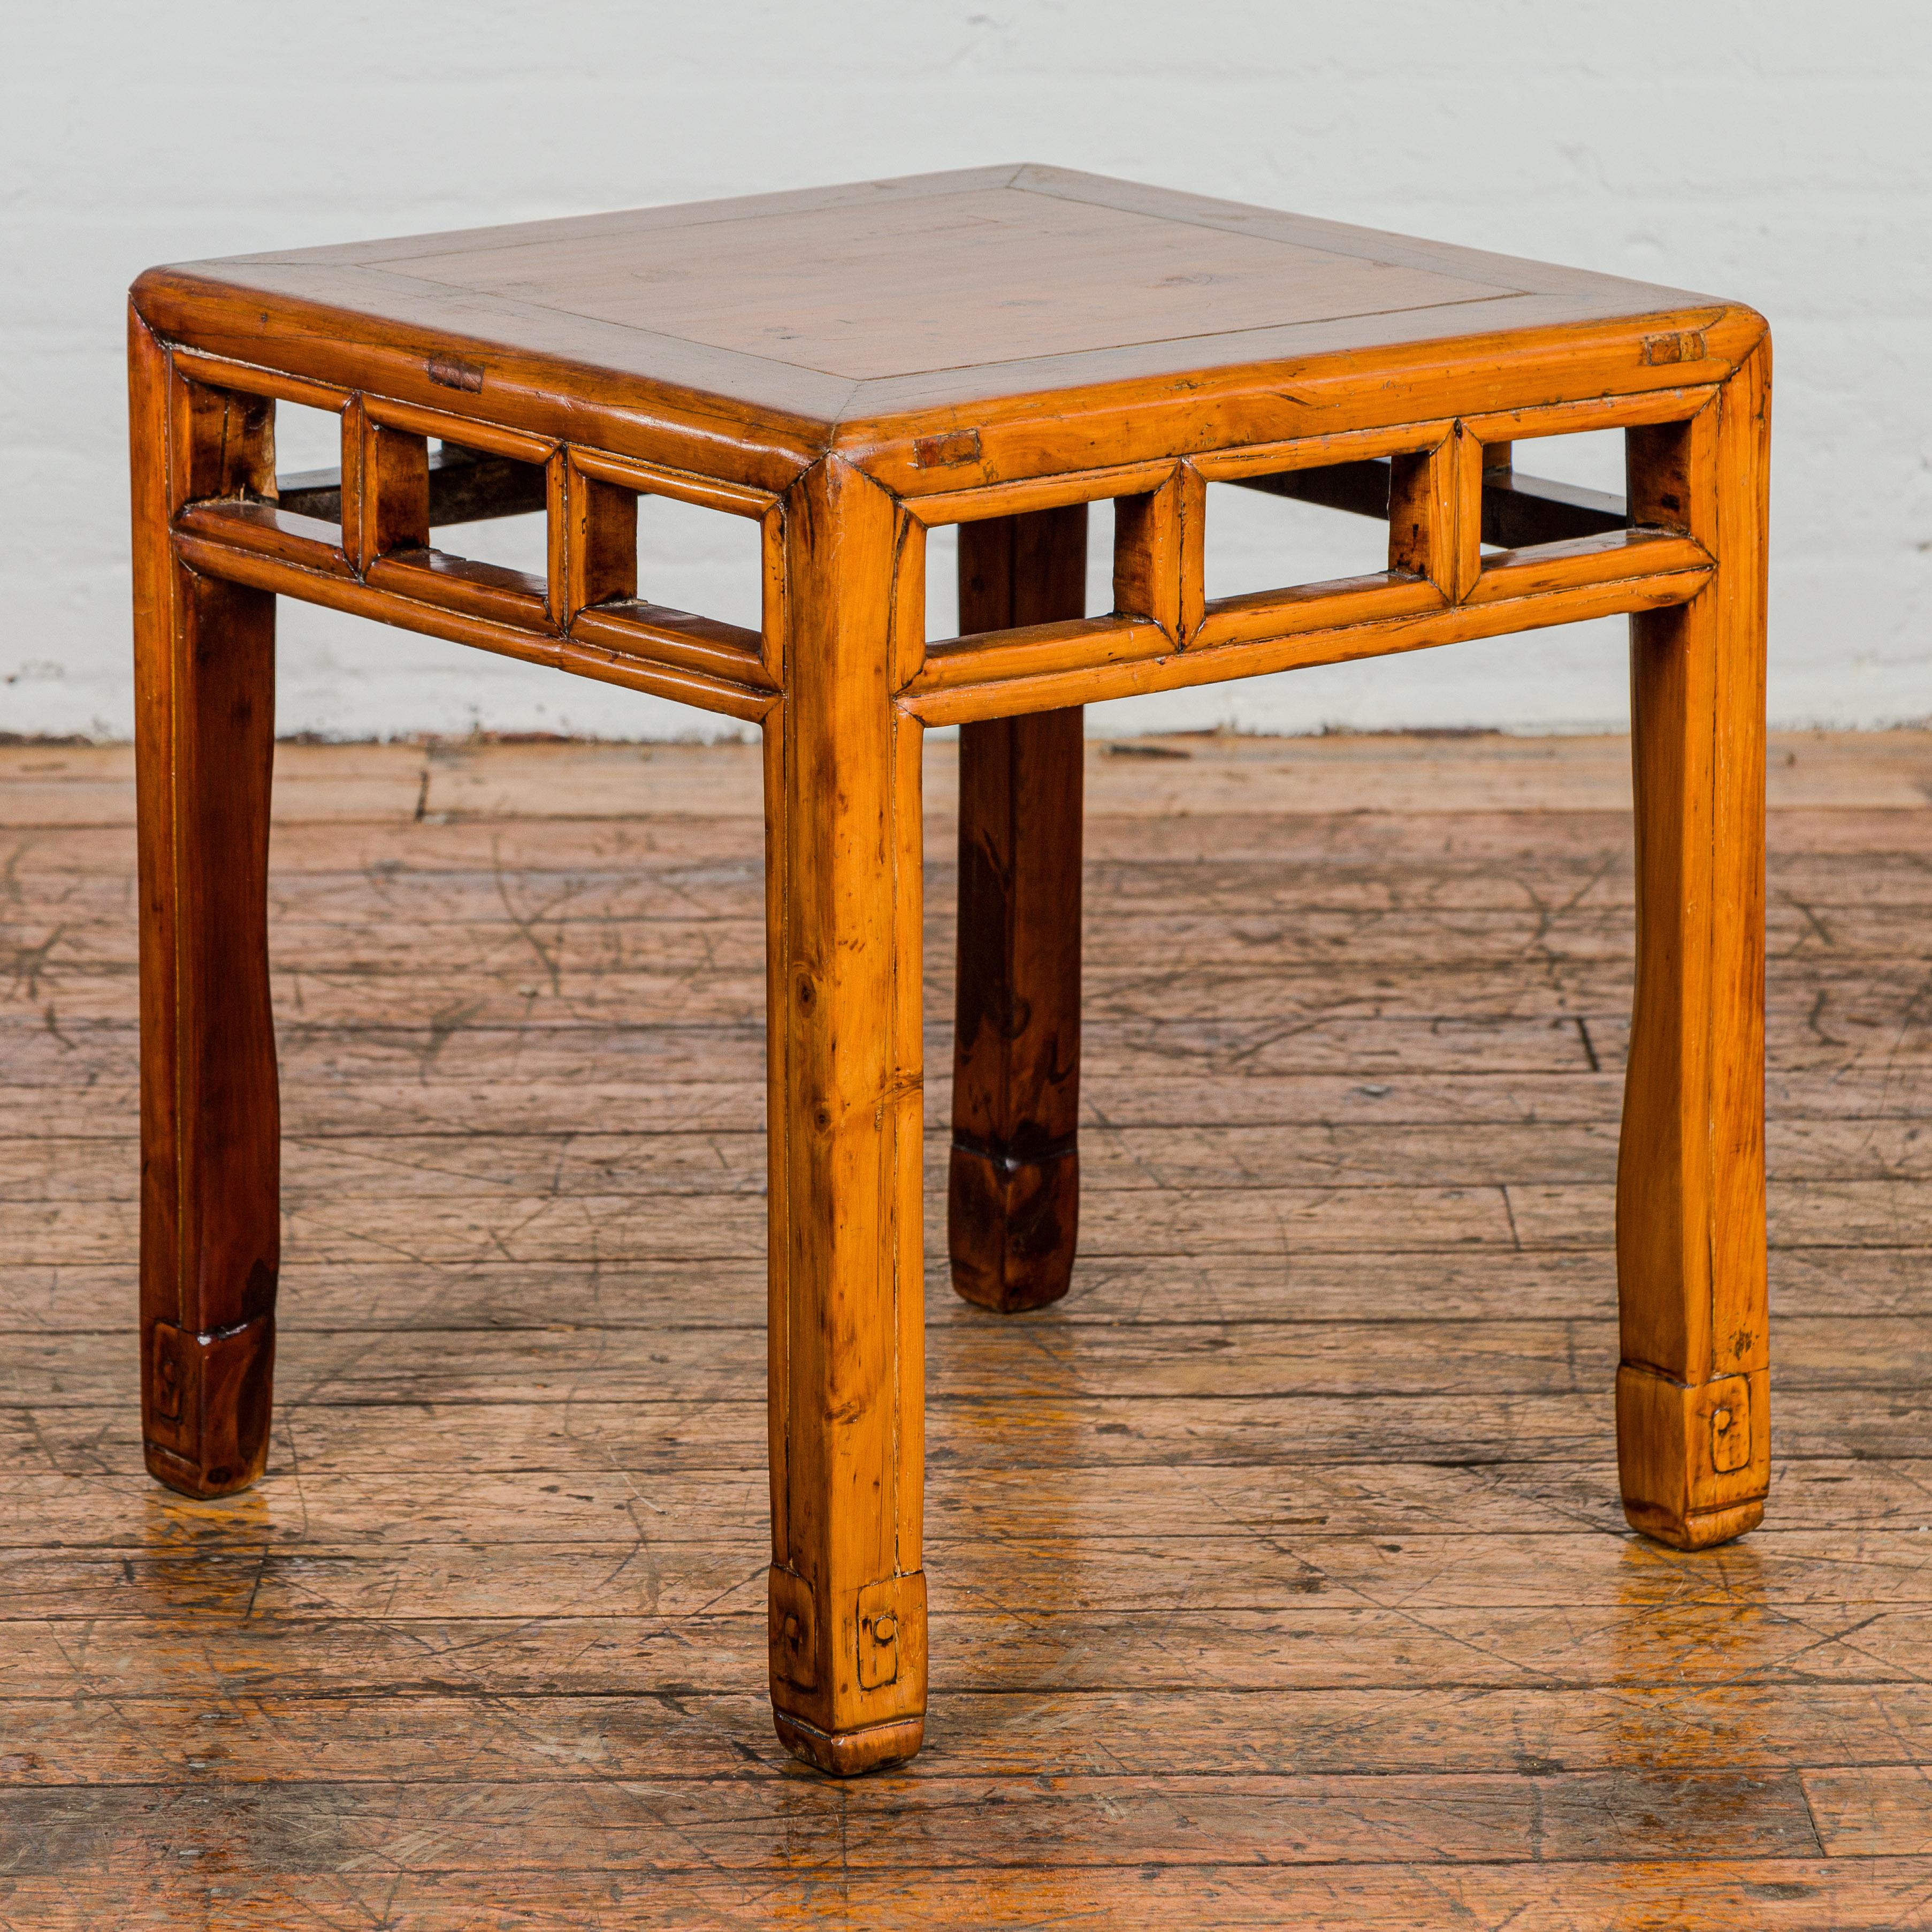 A Late Qing Dynasty period side table with pierced apron adorned with pillar strut motifs and scrolling design on the feet. This Late Qing Dynasty period side table is a true testament to the exquisite craftsmanship of its time. Its intricate design